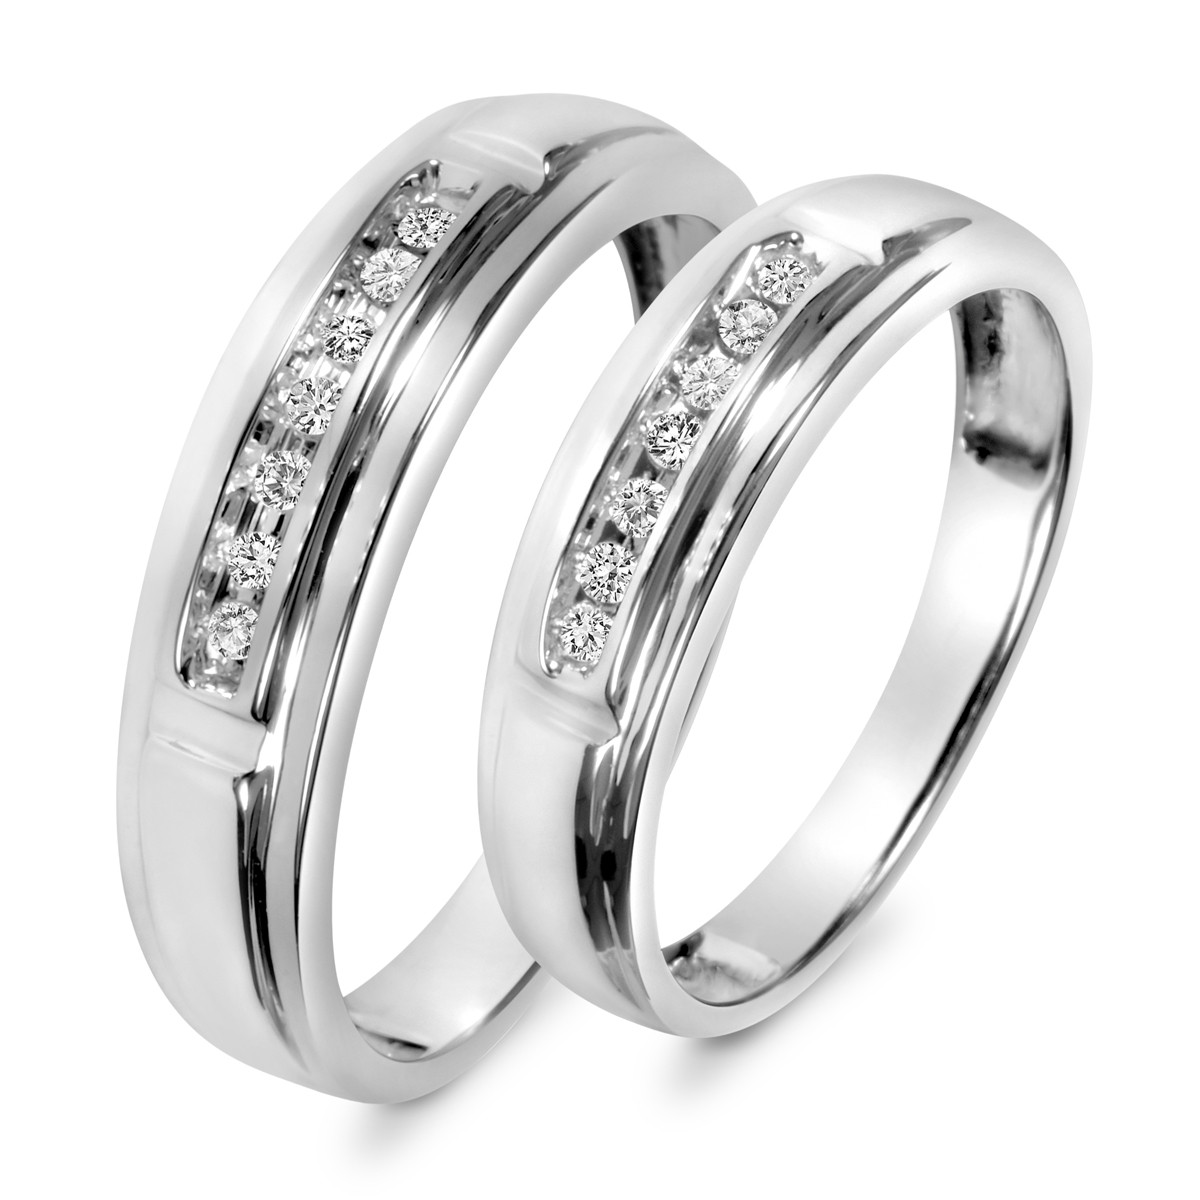 Wedding Band Sets His And Hers
 1 8 Carat T W Diamond His And Hers Wedding Band Set 10K